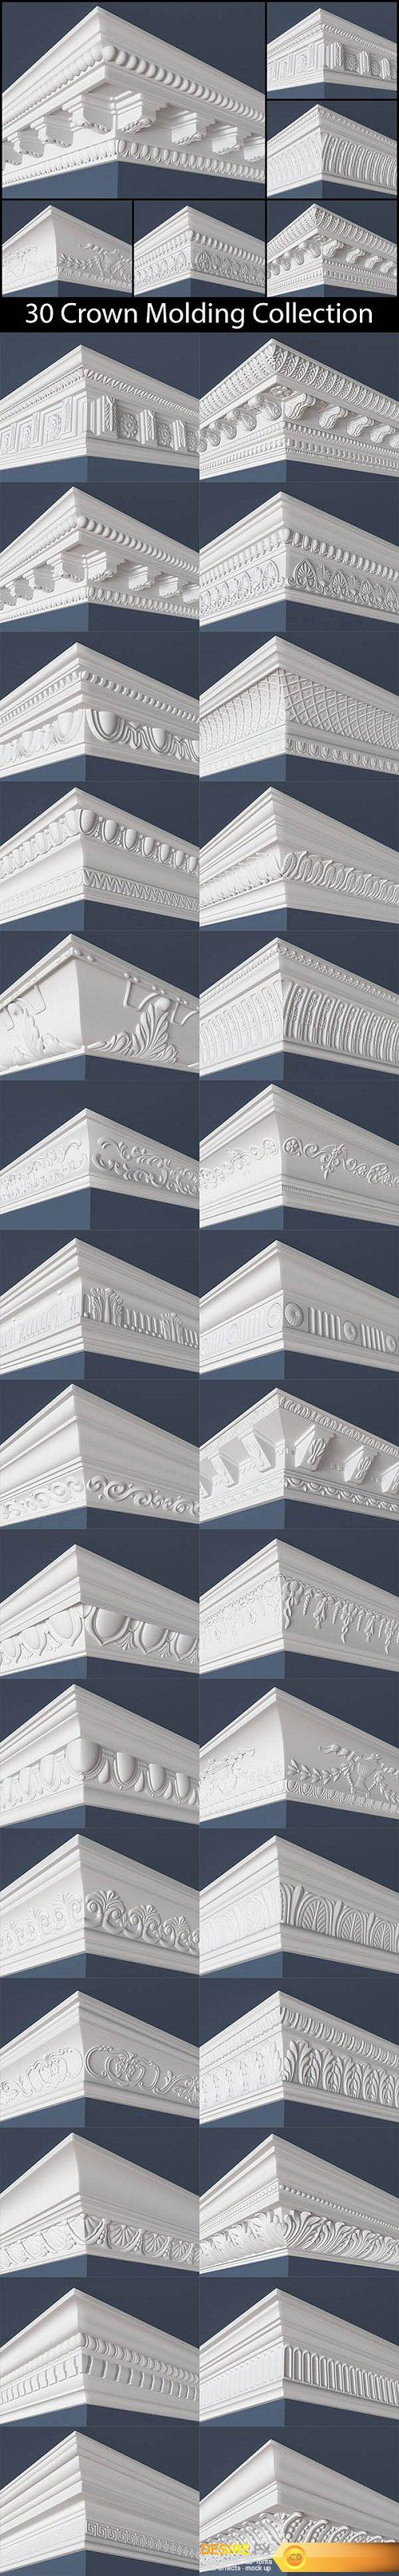 30 Crown Molding Collection 3D Model